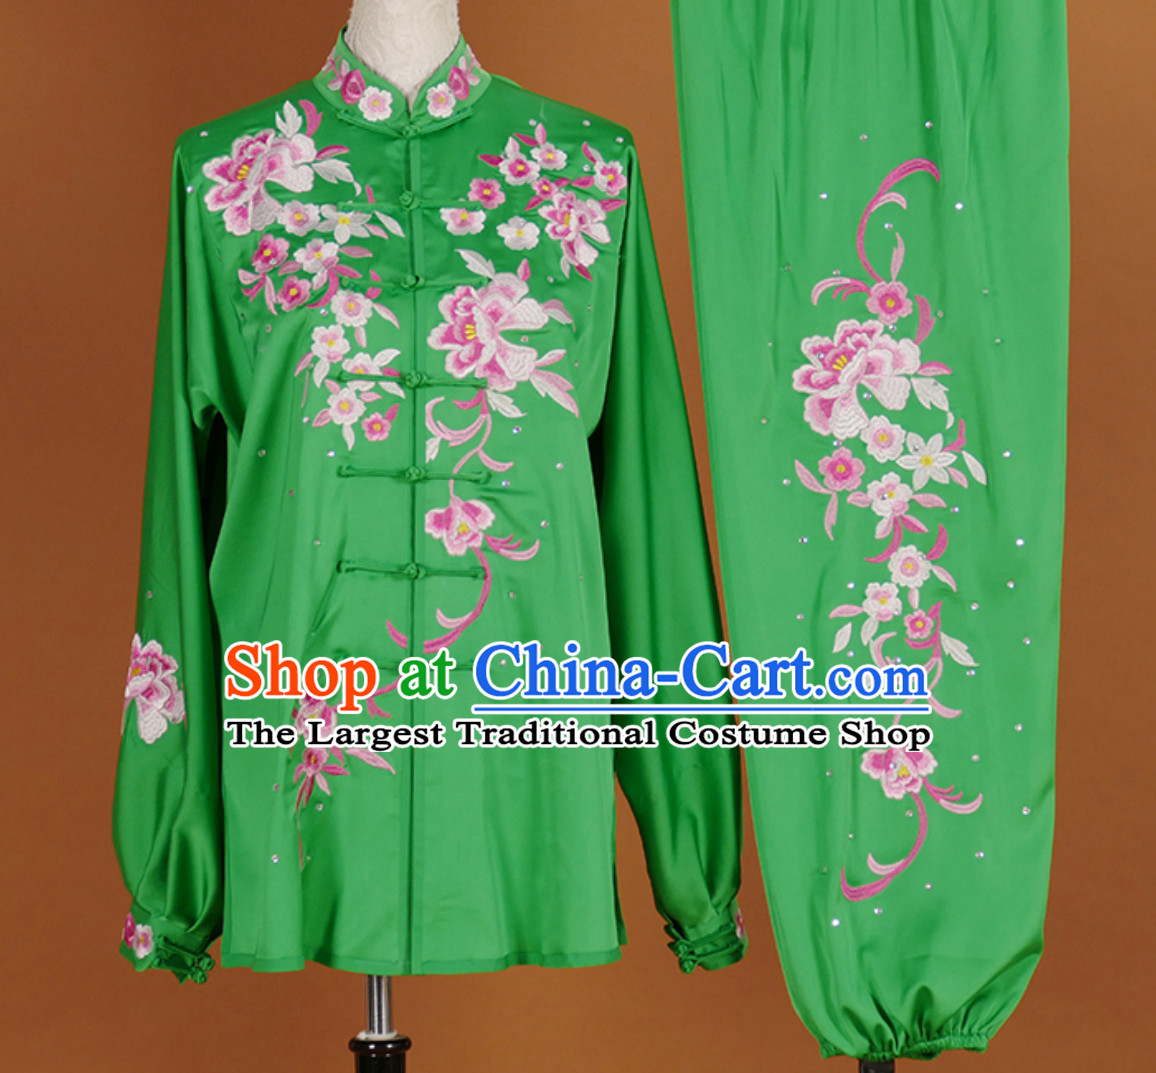 Top Embroidered Green Flower Long Sleeves Tai Chi Suits Martial Arts Clothing Kung Fu Dress Wushu Suits Stage Performance Championship Competition Full Set